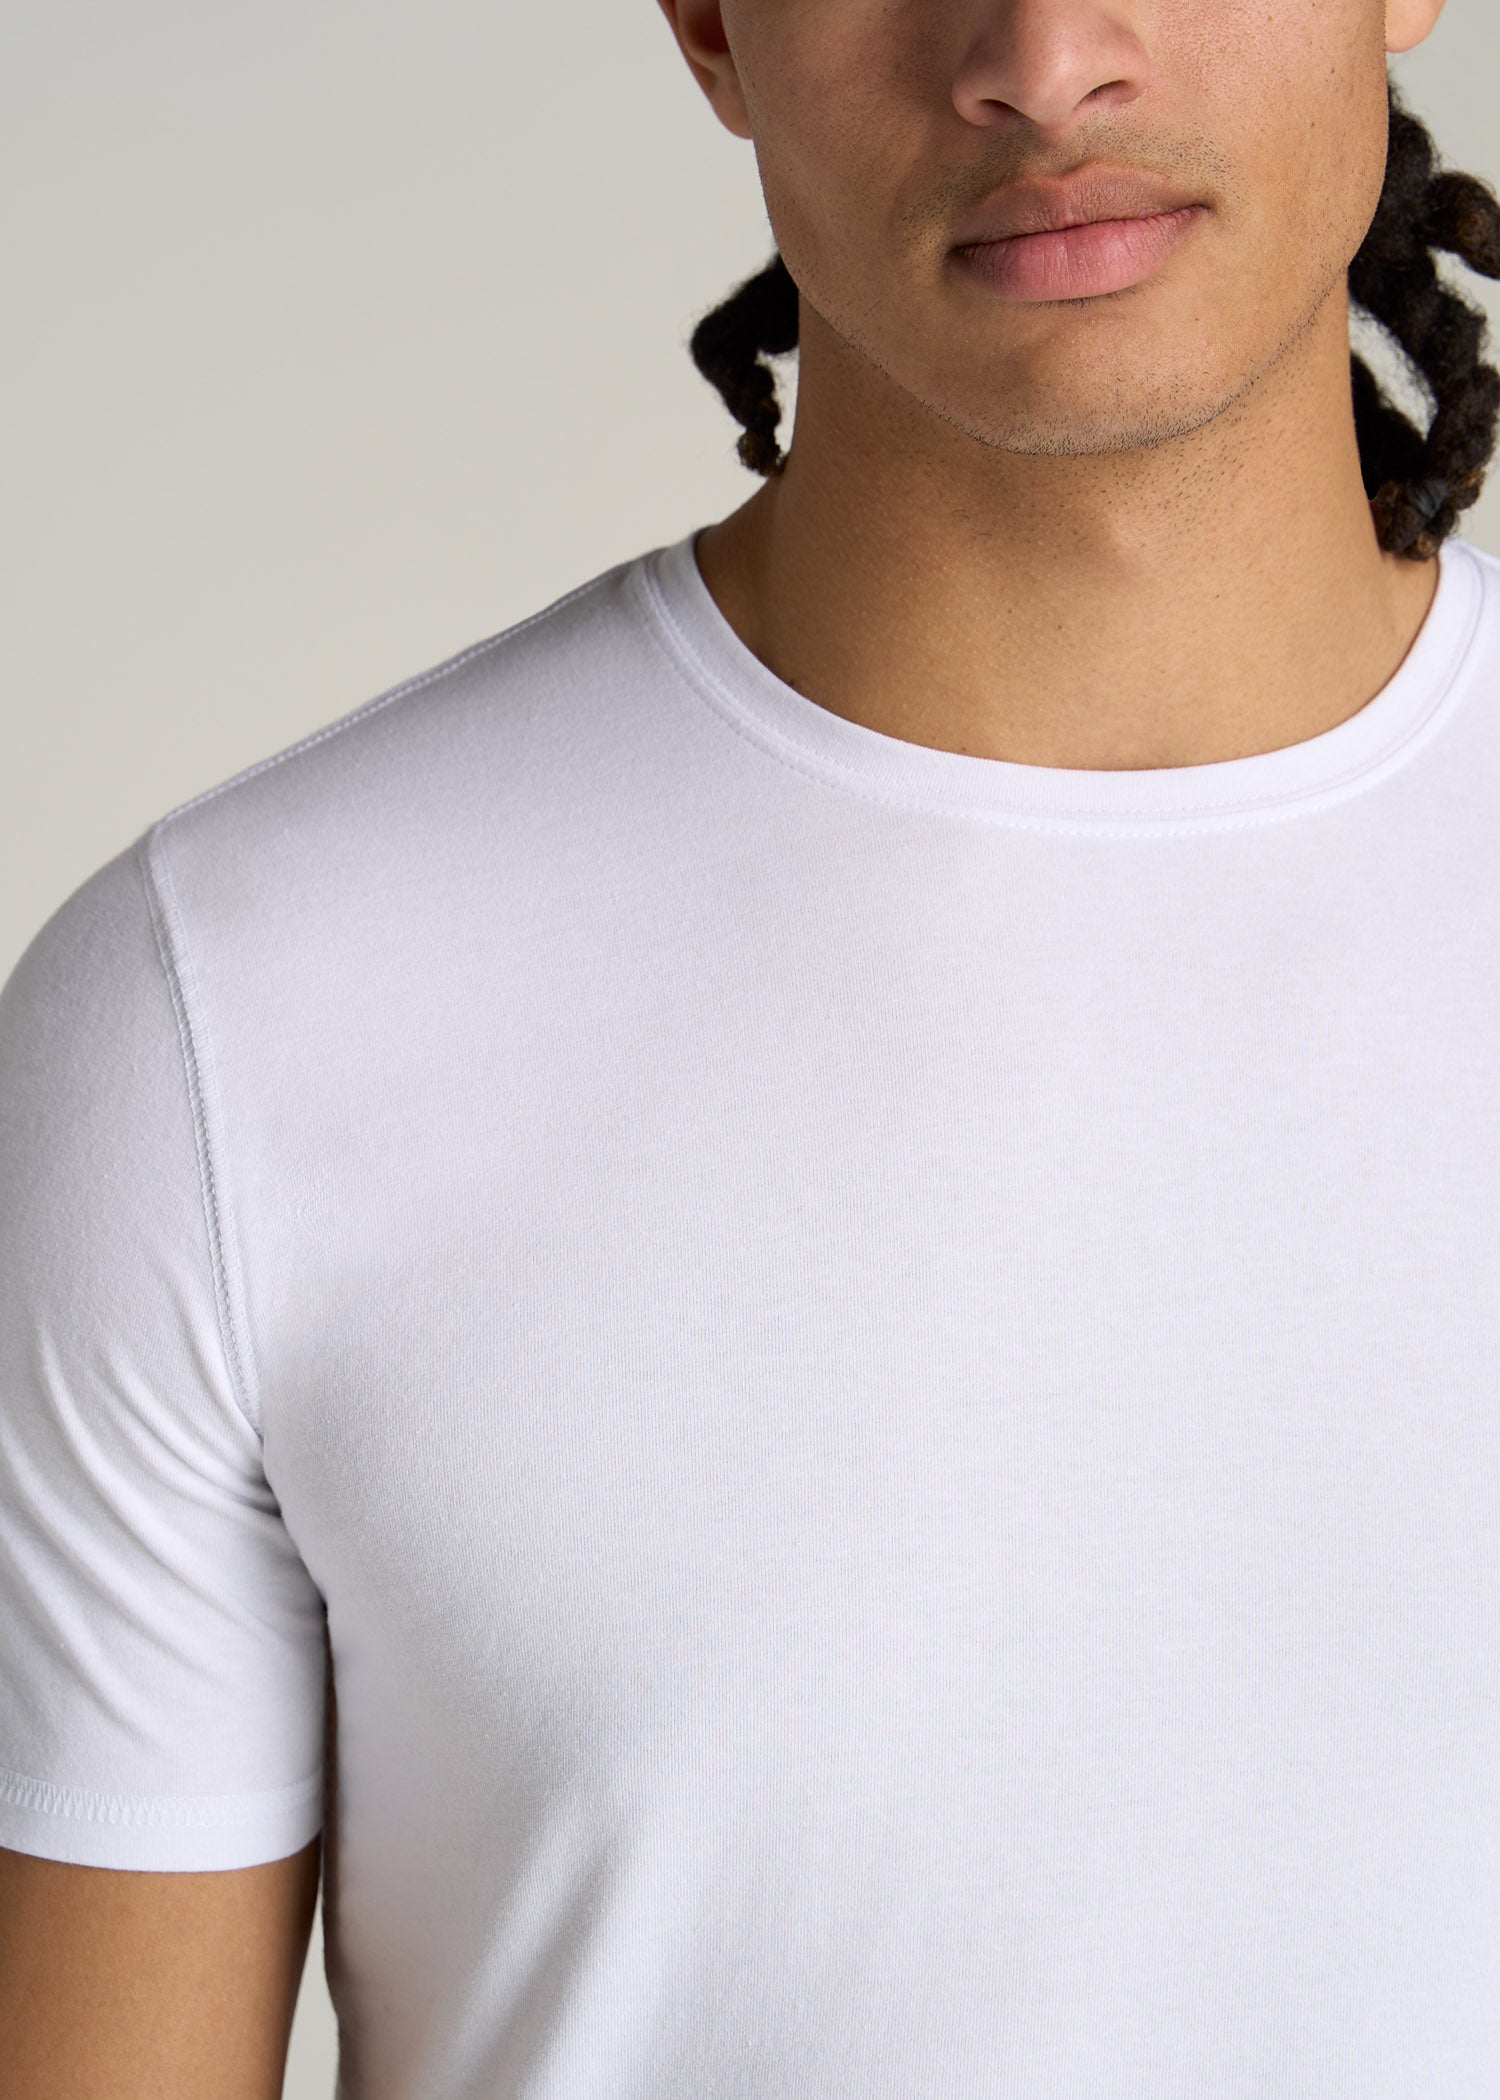 The Essential SLIM-FIT Crewneck Men's Tall Tees in White